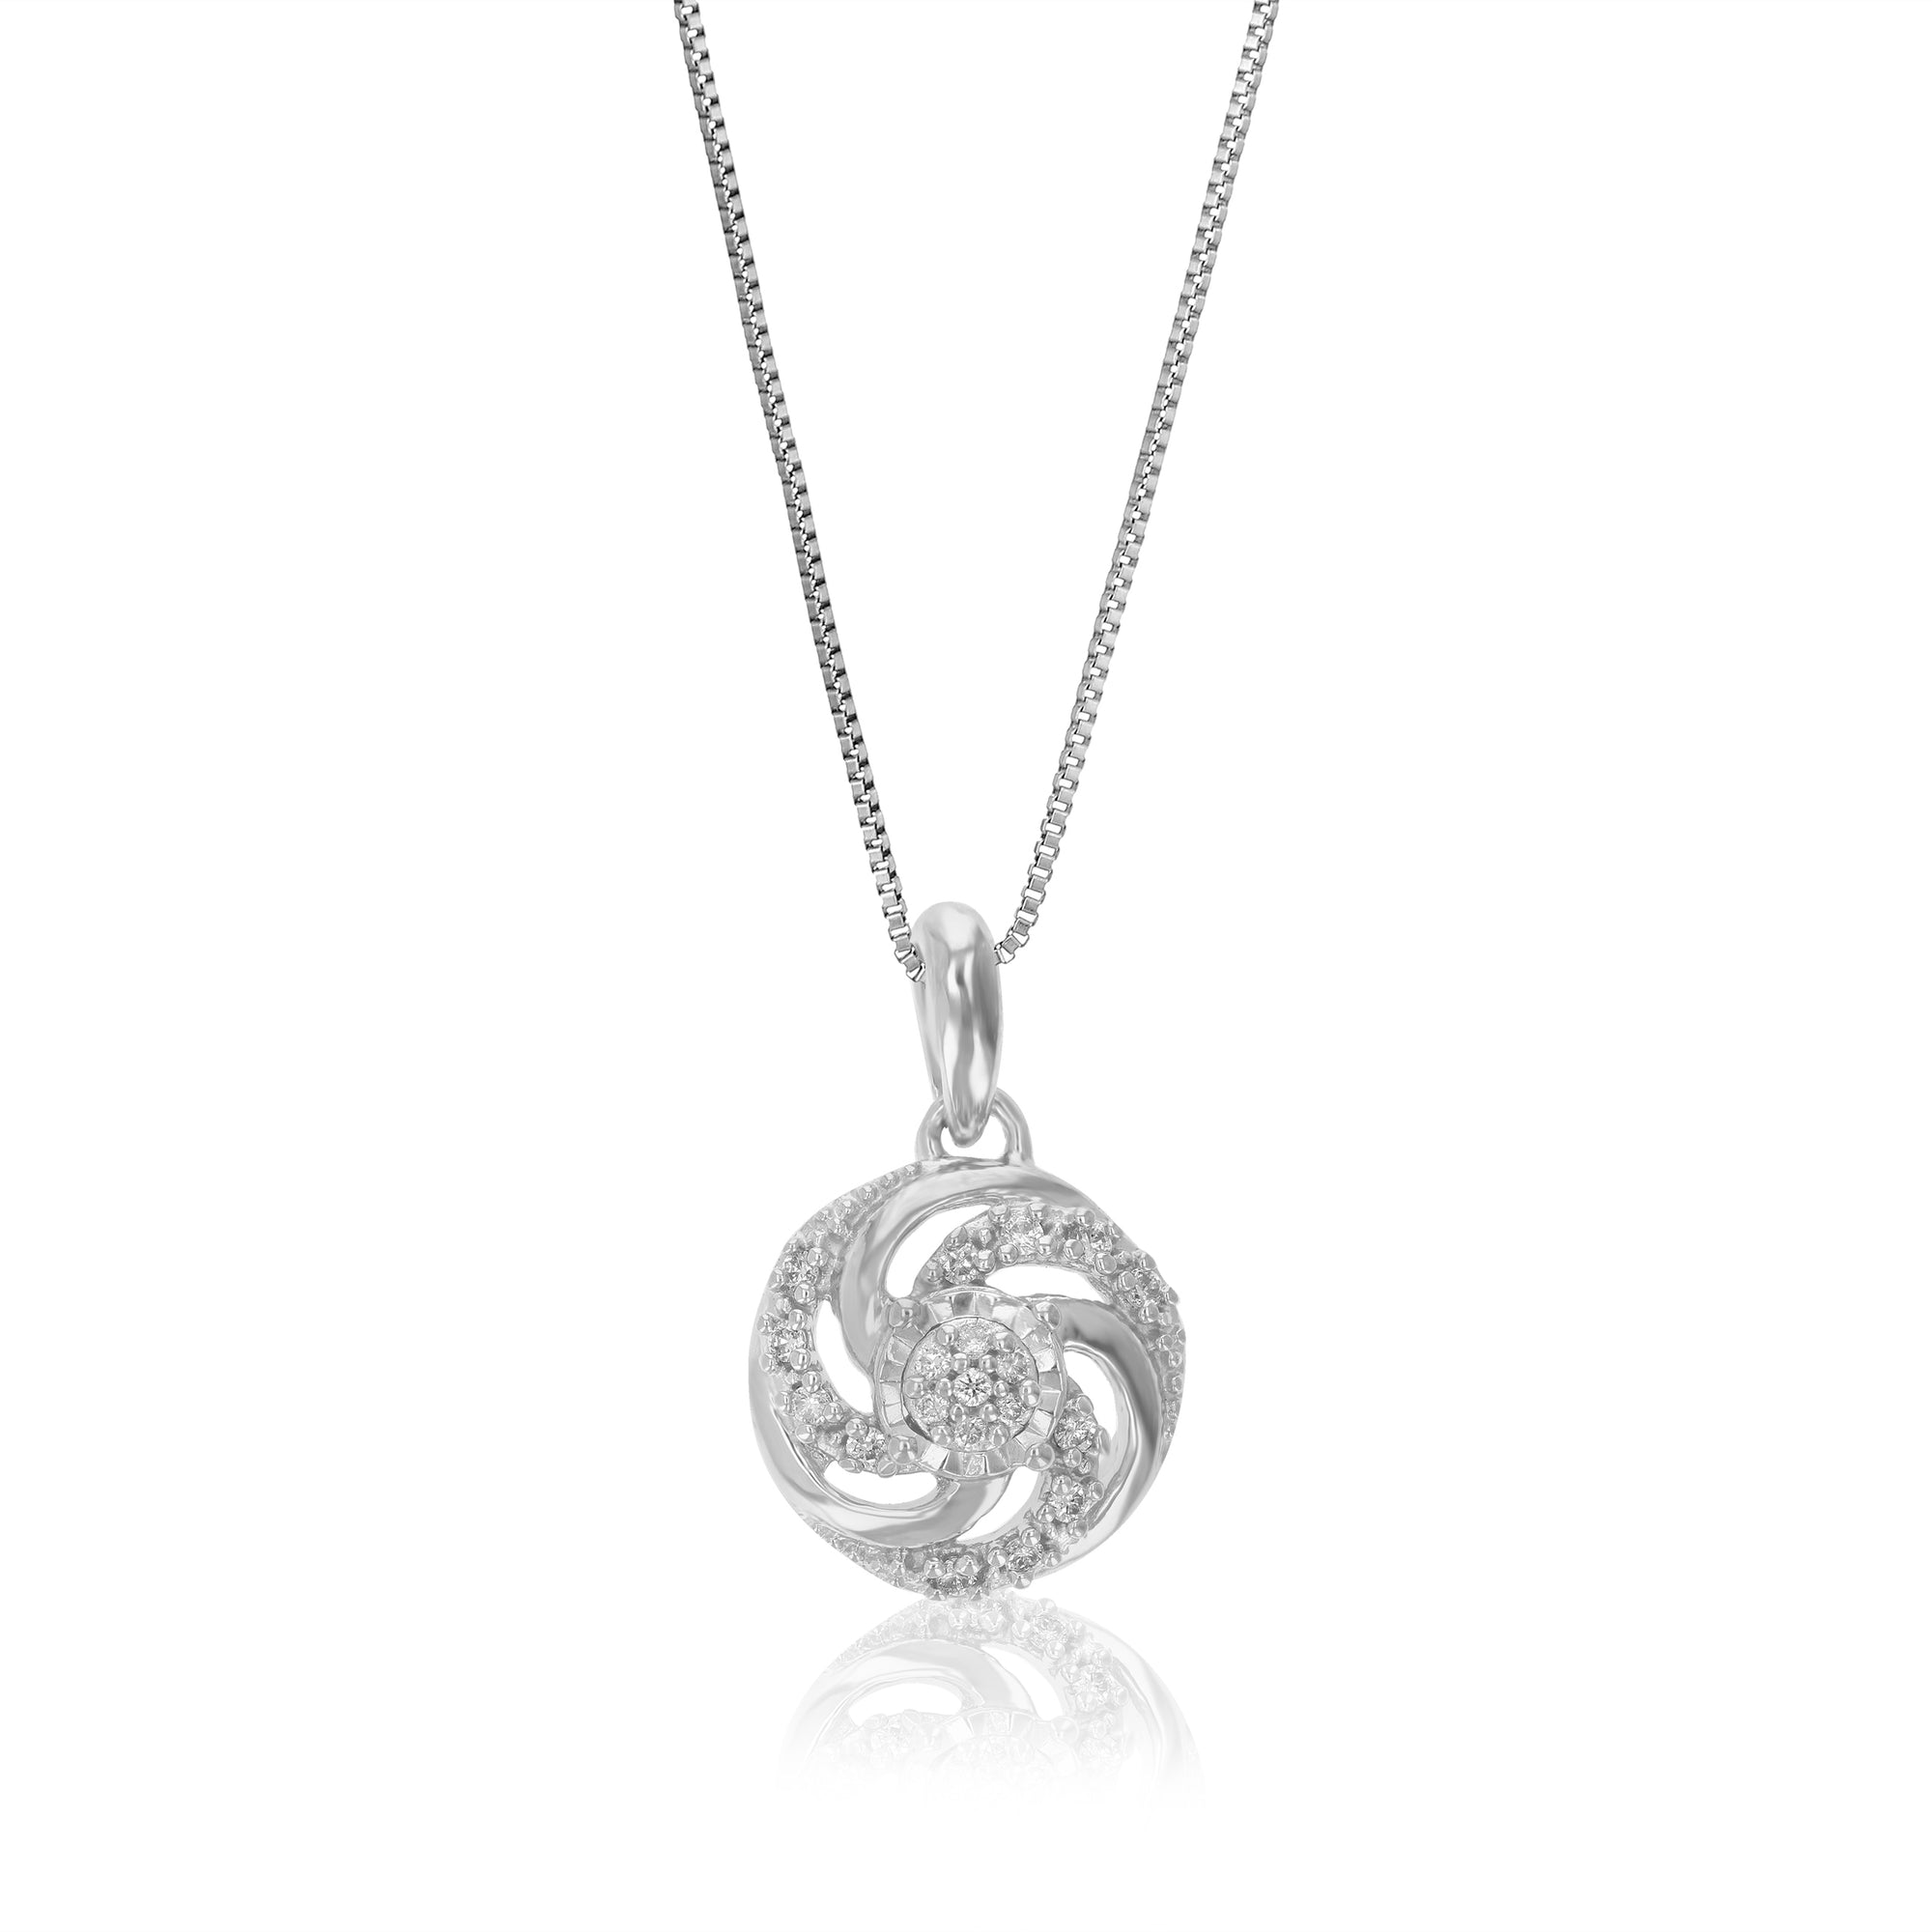 1/12 cttw Diamond Pendant Necklace for Women, Lab Grown Diamond Round Pendant Necklace in .925 Sterling Silver with Chain, Size 2/3 Inch